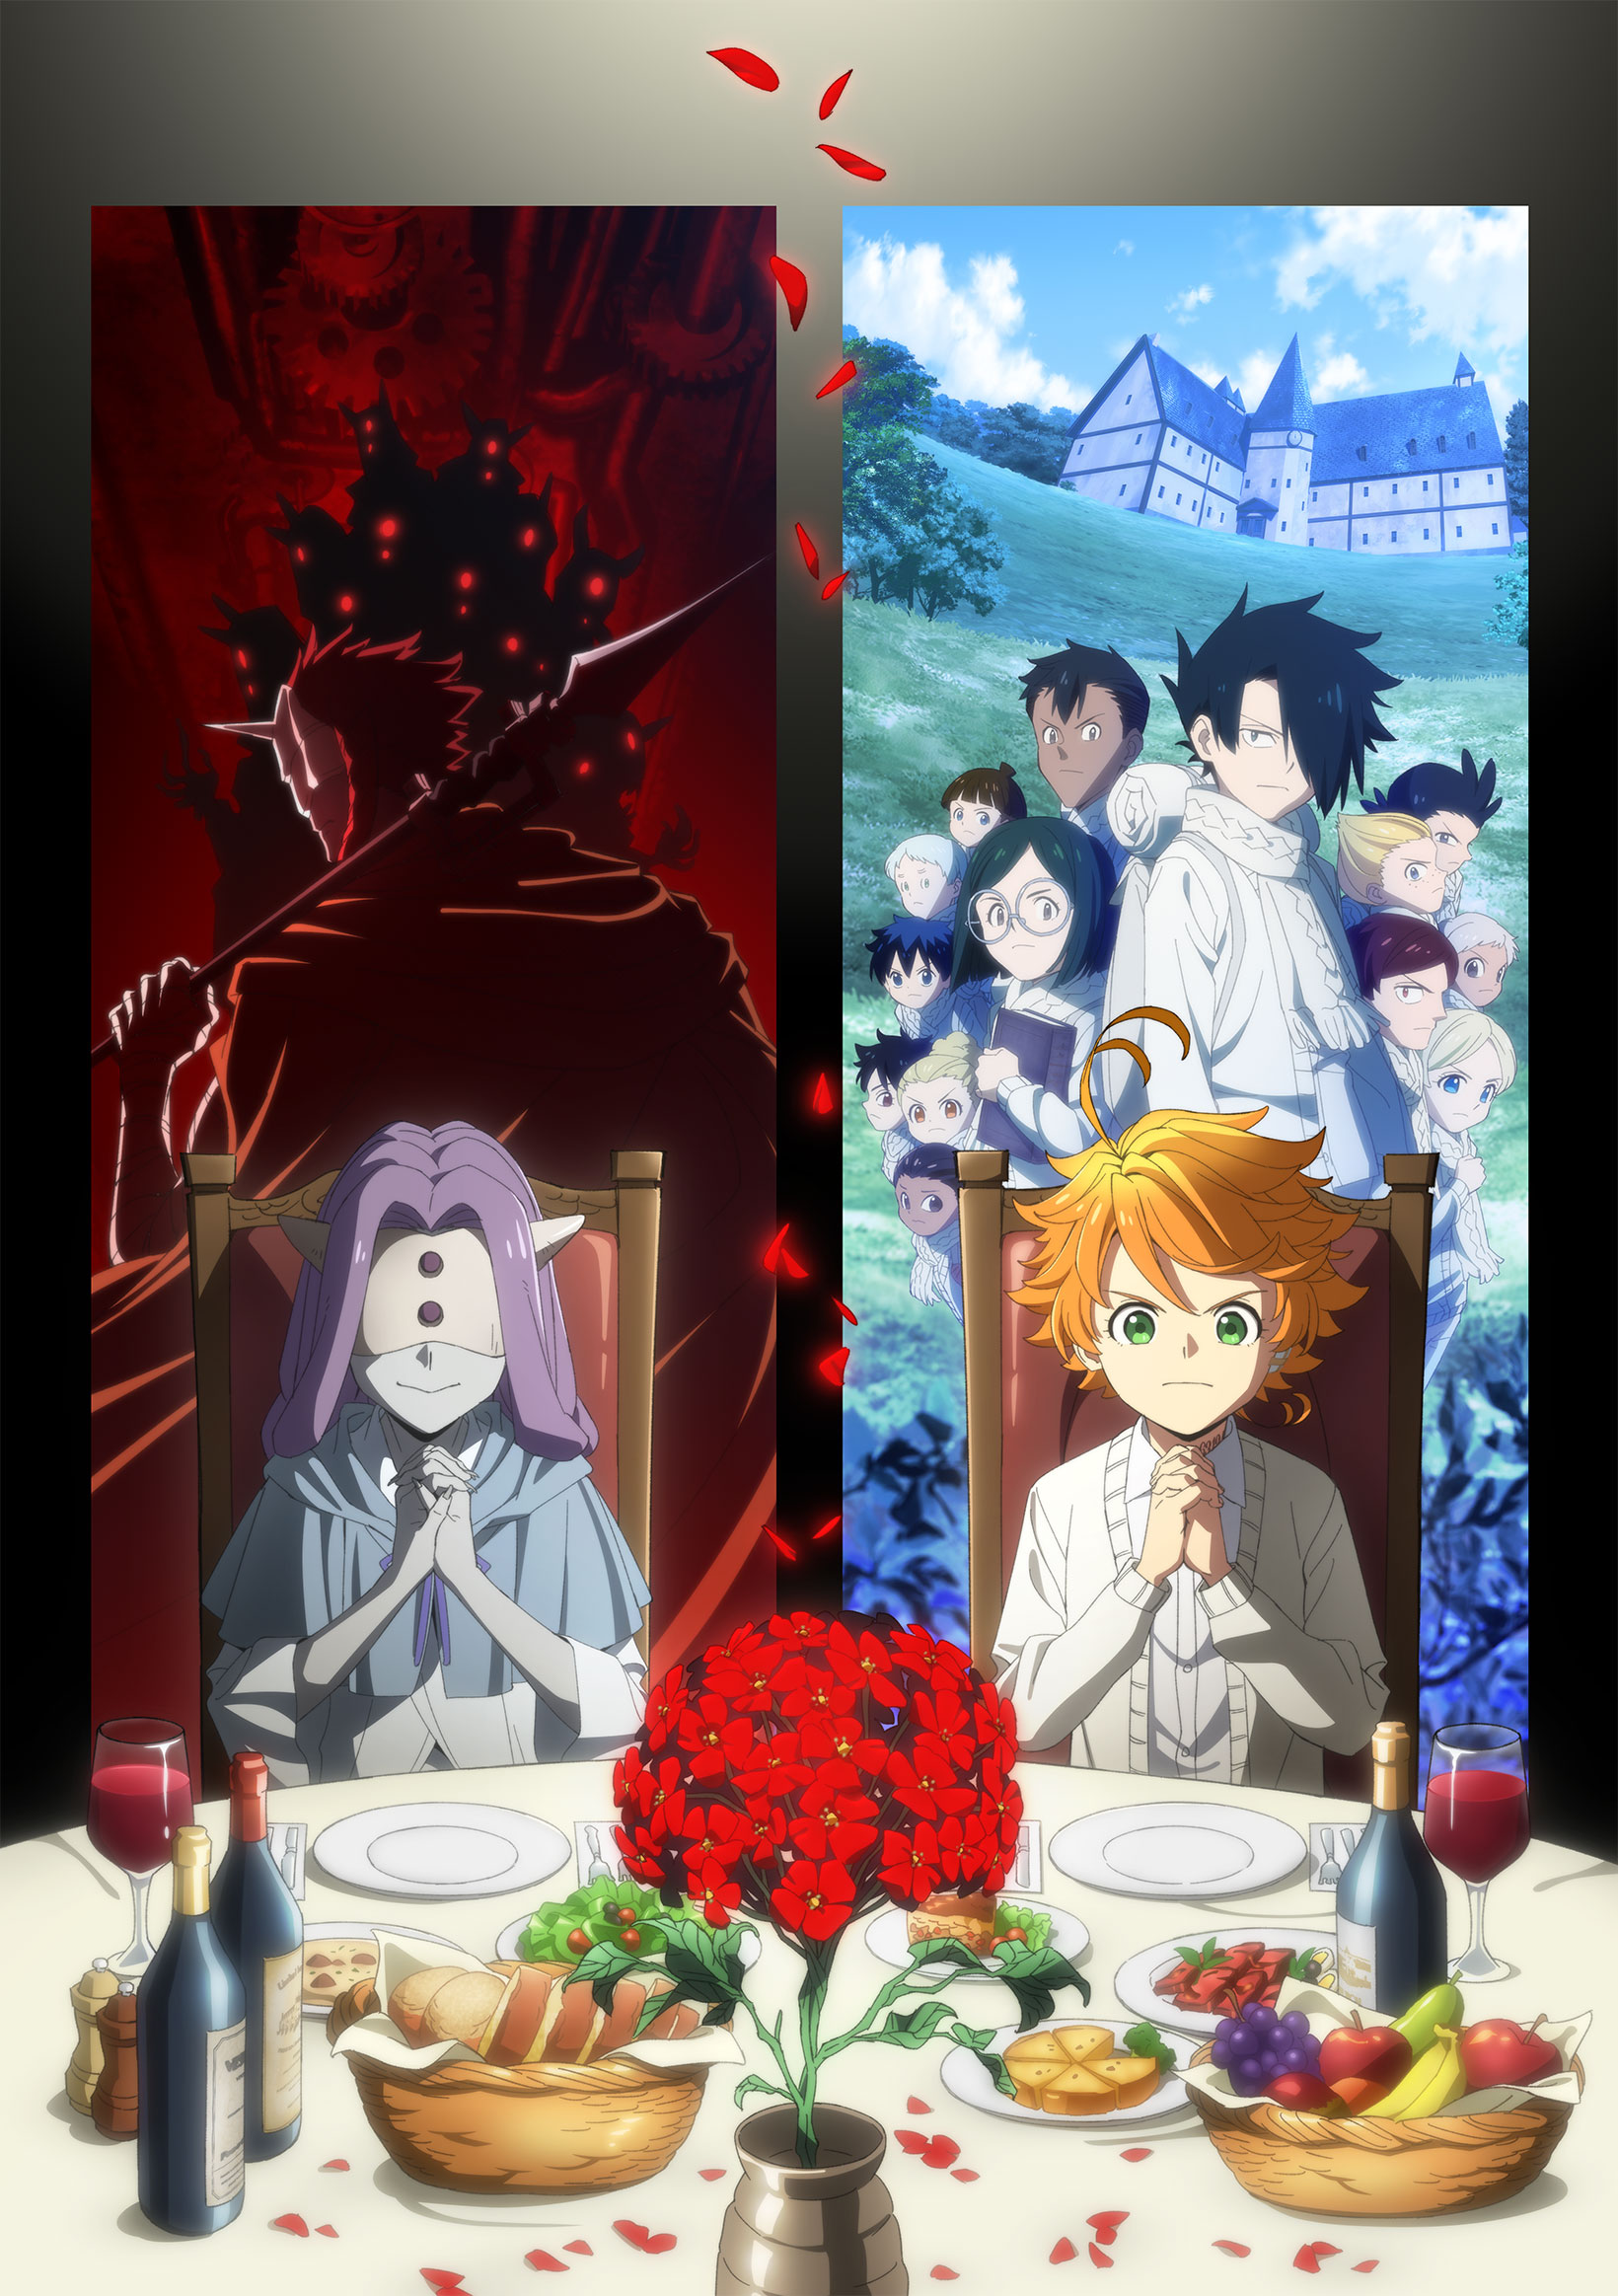 cloverworks 3 shows winter 2021 - The Promised Neverland